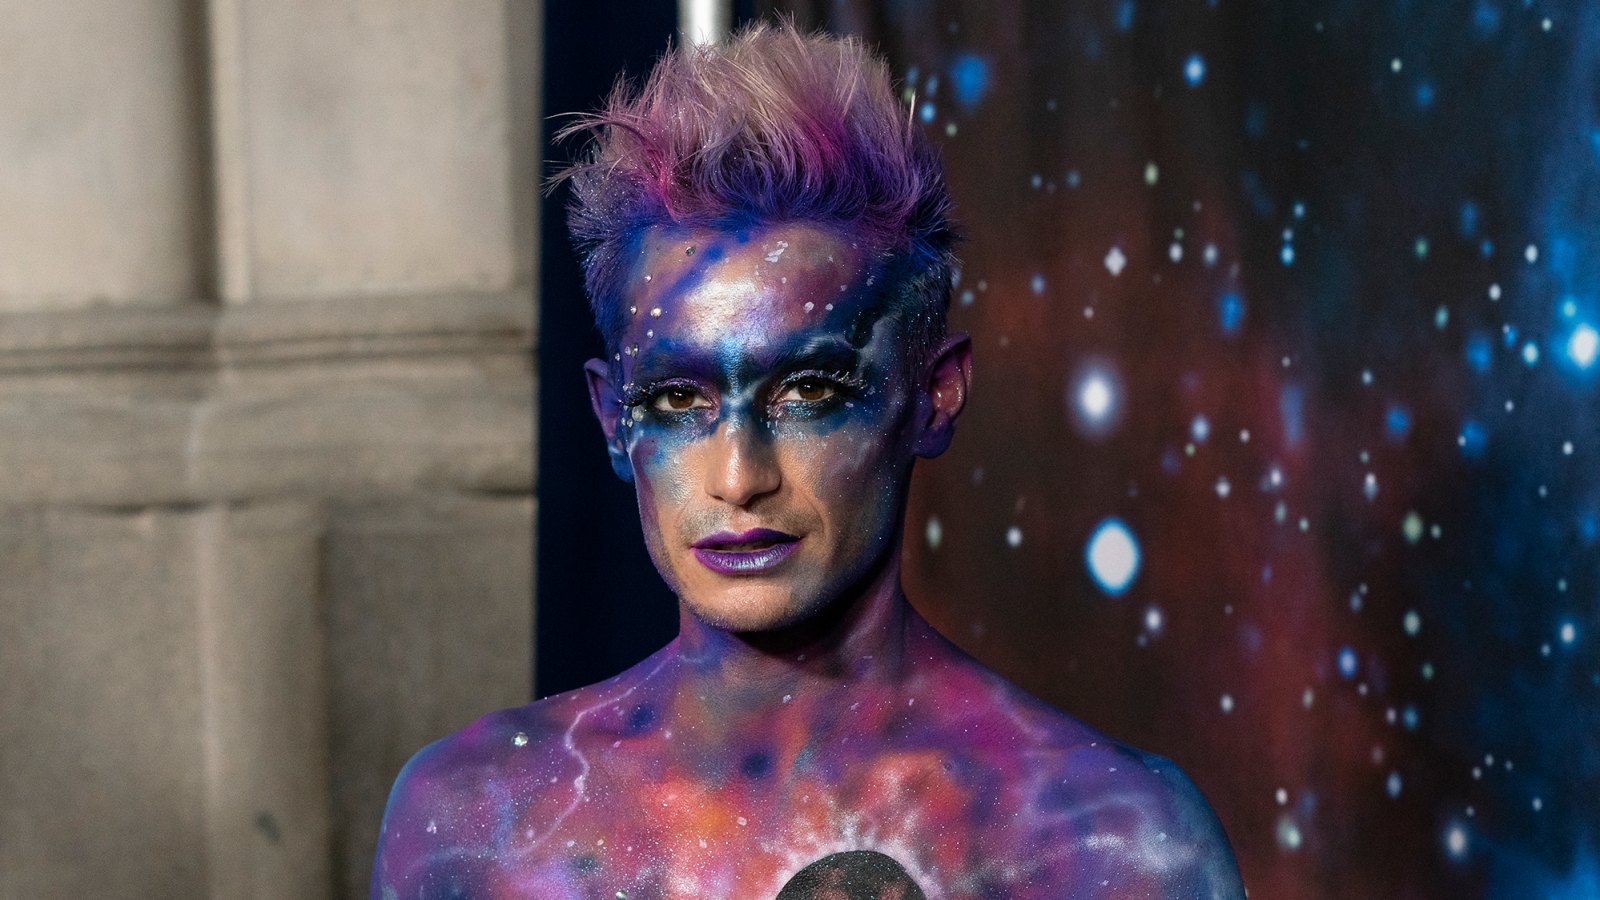 Frankie Grande Reveals His Moment of Clarity to Get Sober 'Came After the Manchester Bombings'